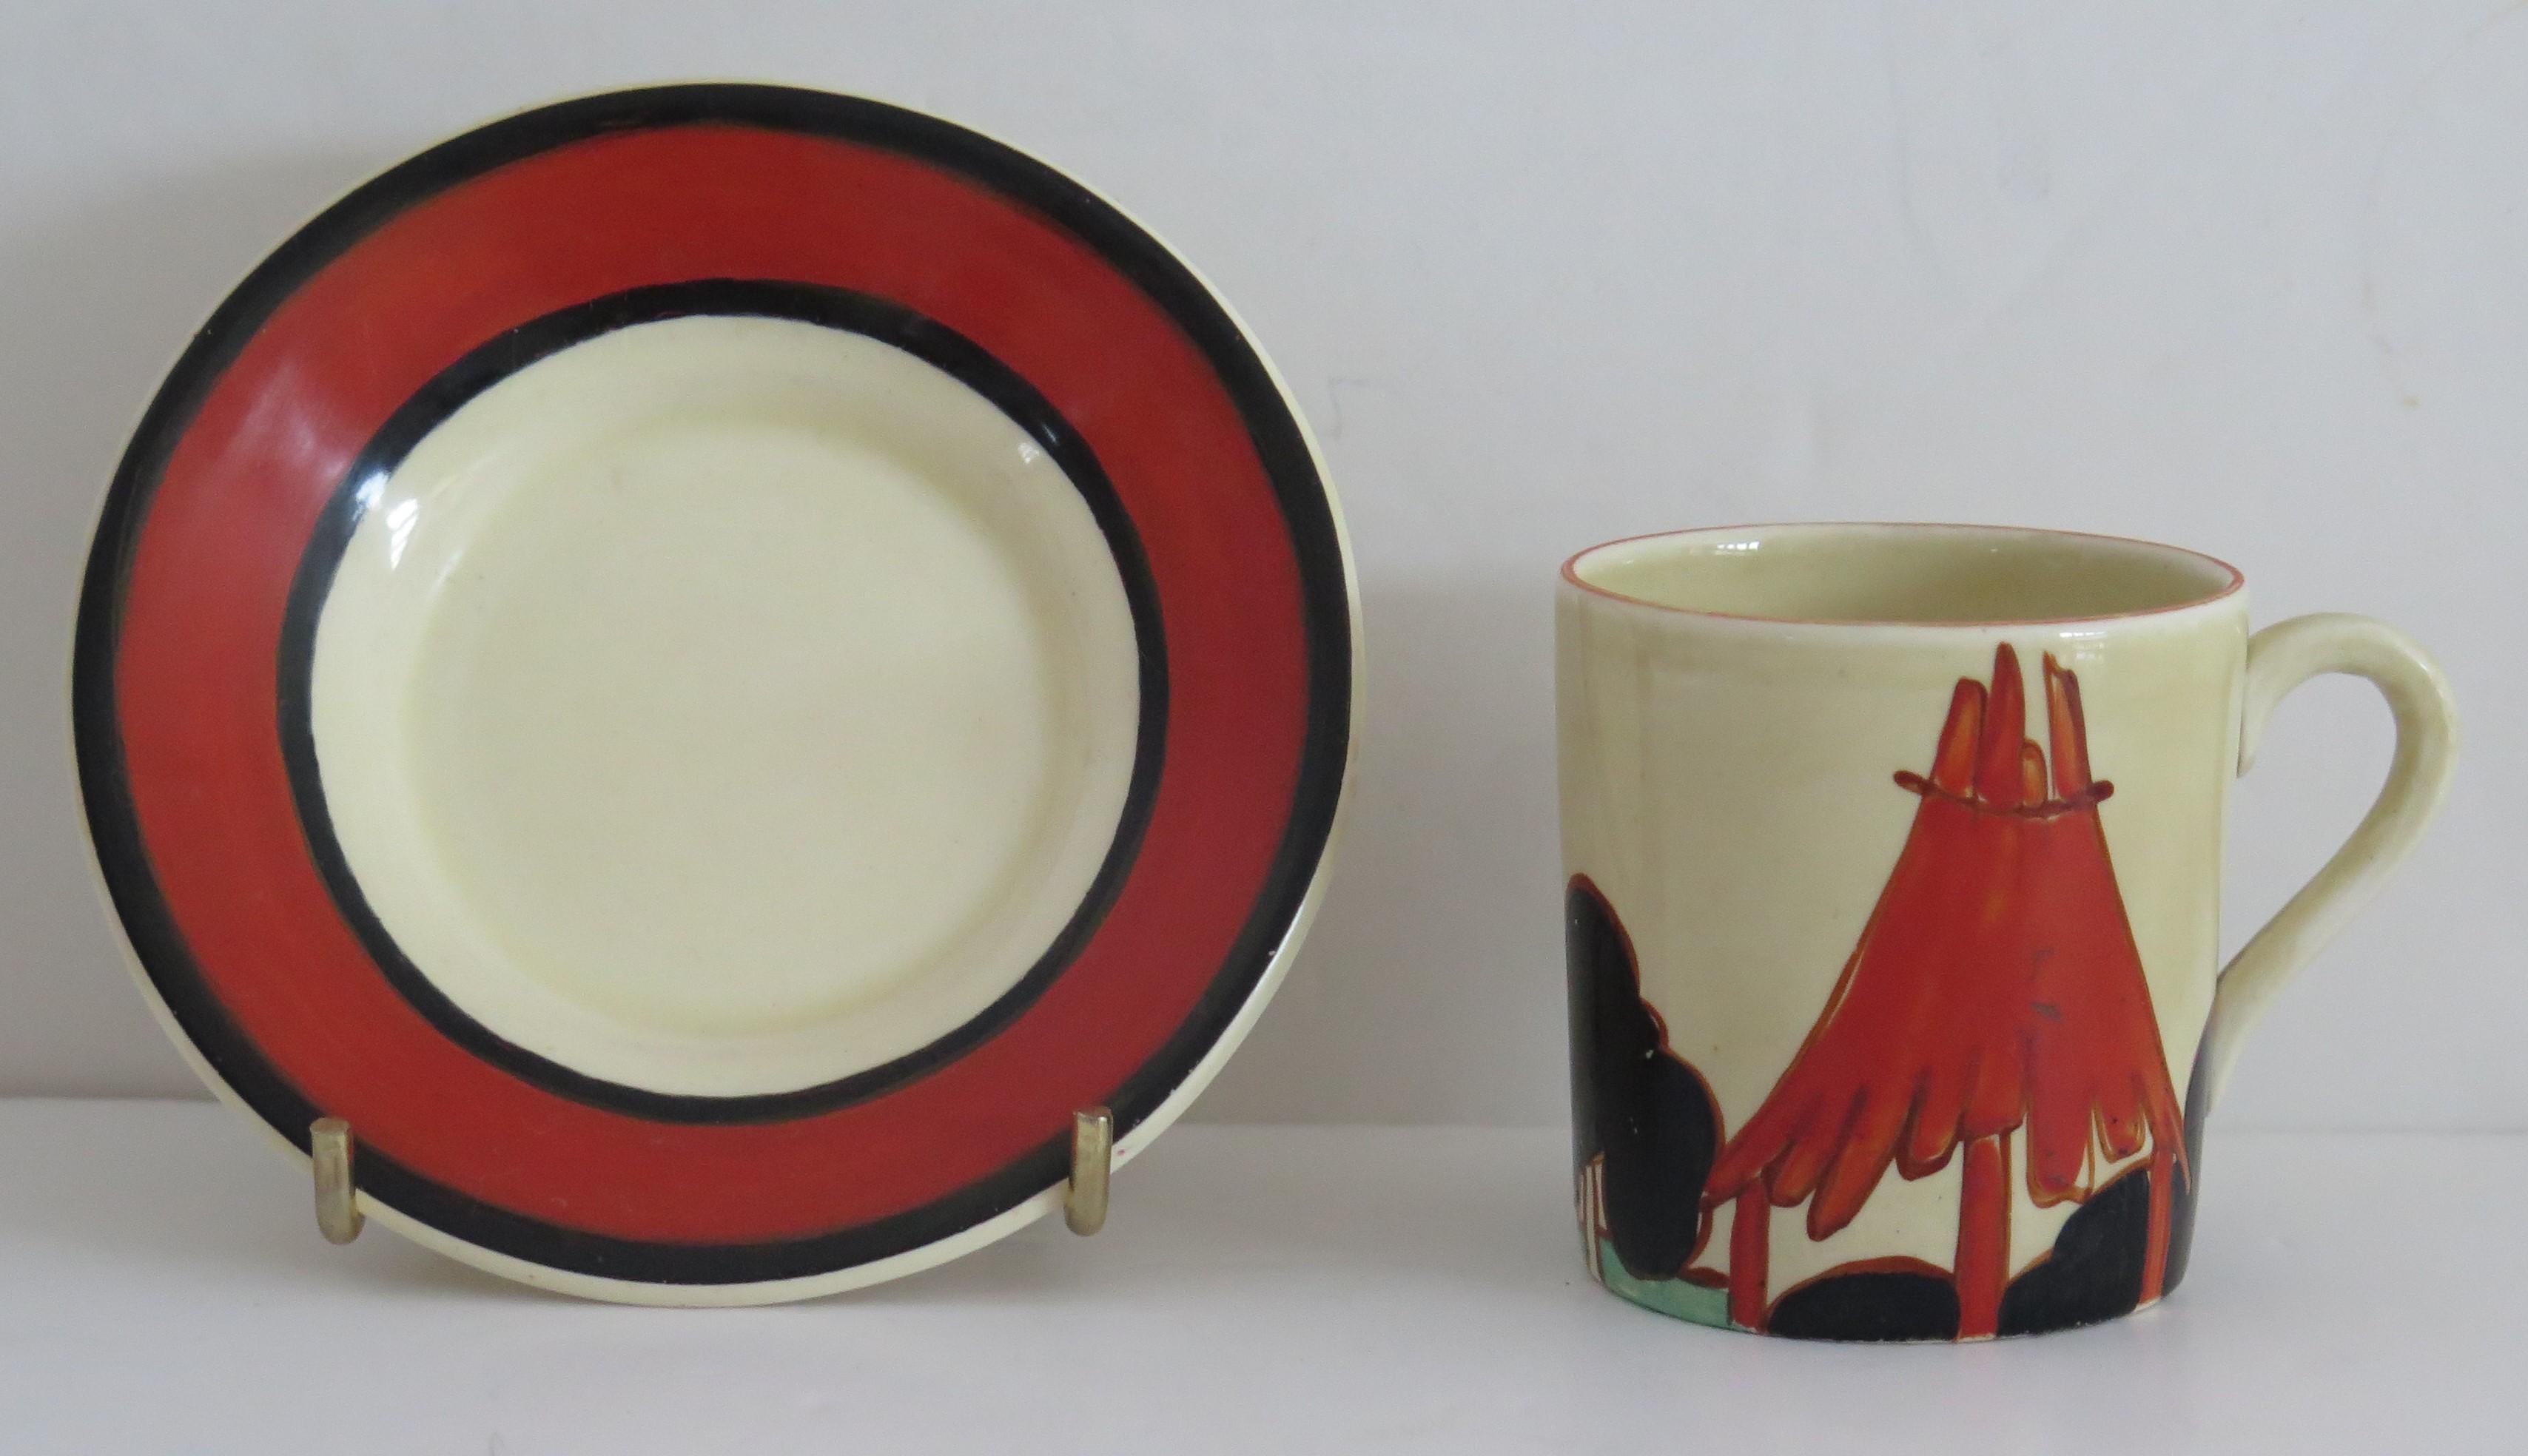 This is a cup & saucer duo in the rare, hand painted 